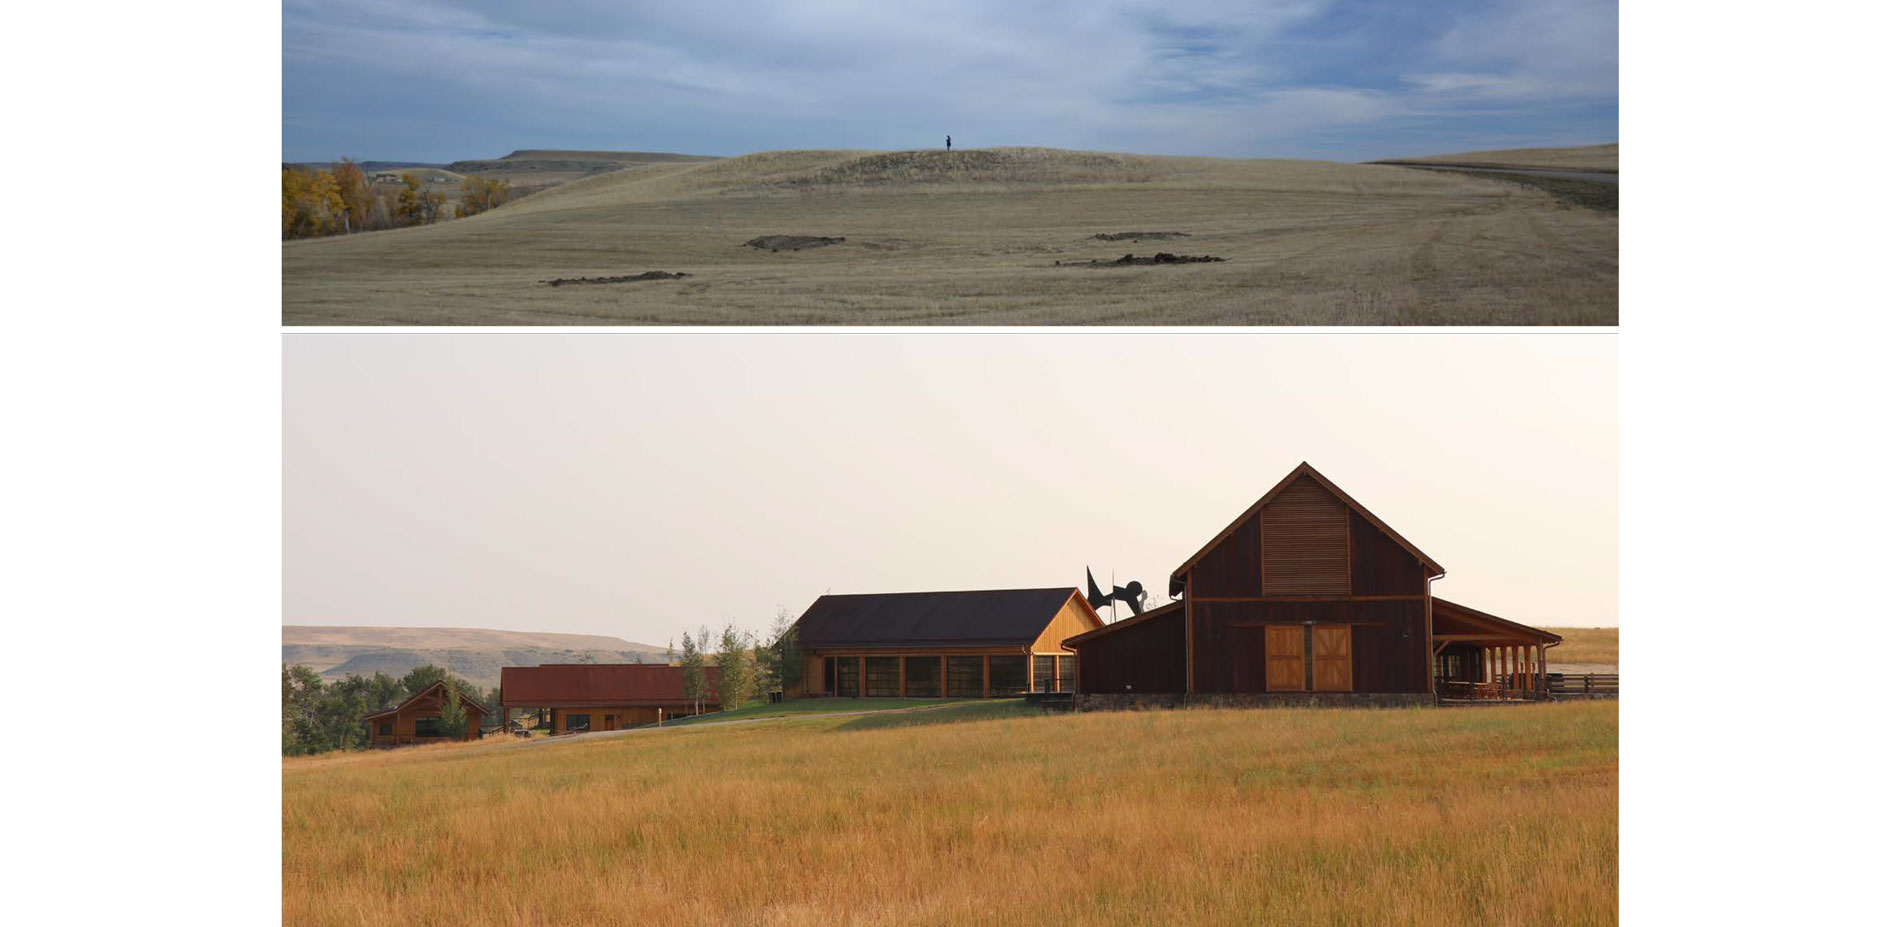 Before and After: Working with existing landforms, the landscape architect collaborated with the project team to strategically locate and site archite…